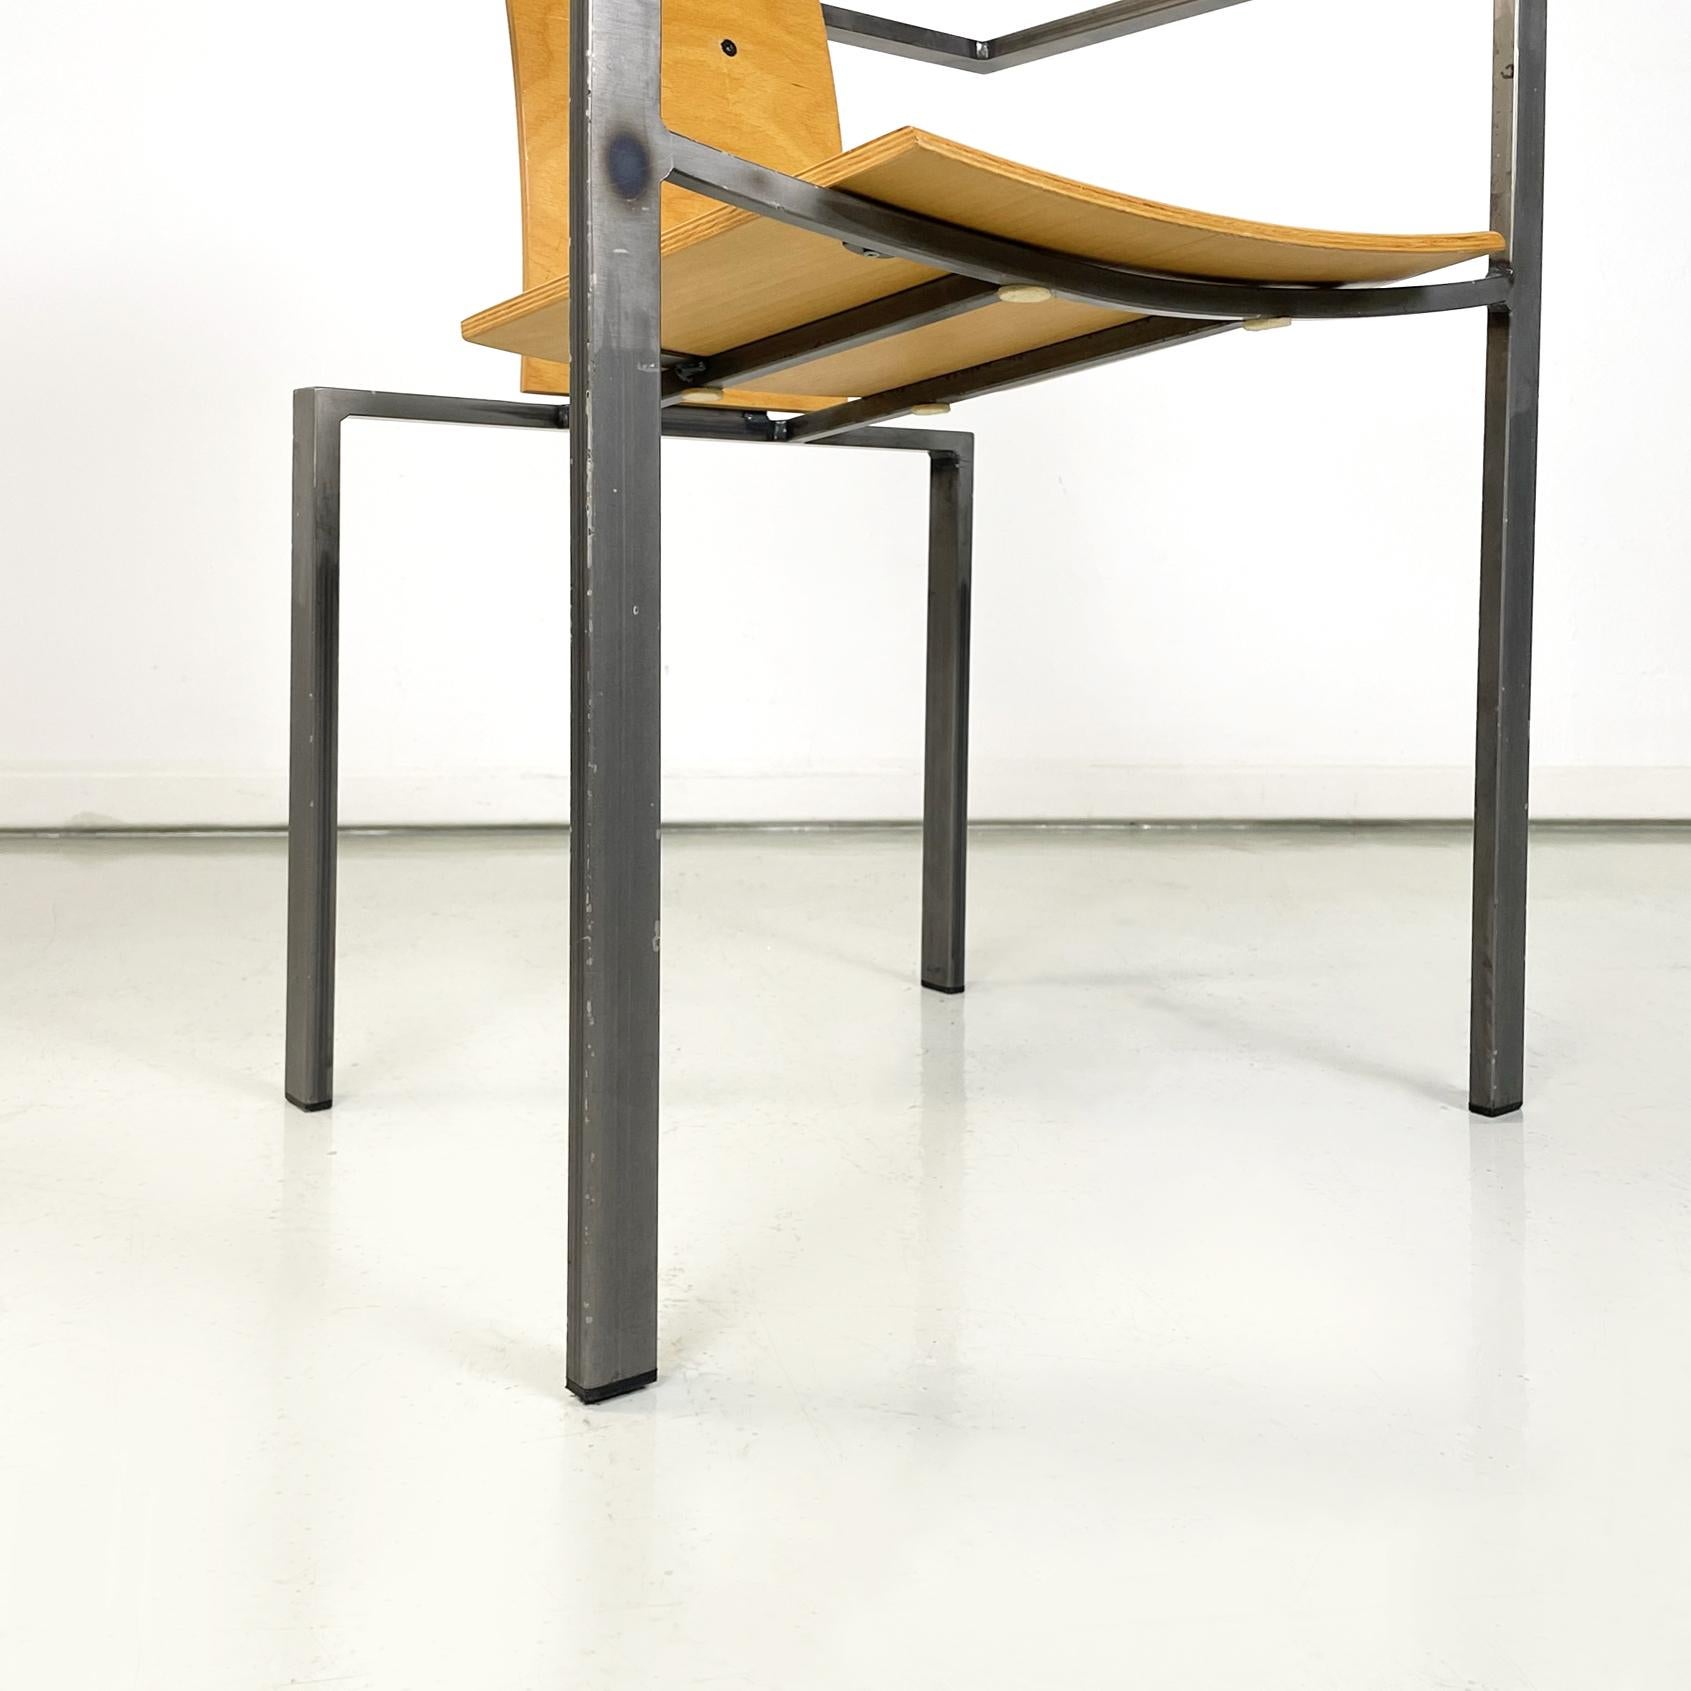 German Modern Squared Chair in Wood and Metal by Karl-Friedrich Foster KKF, 1980 For Sale 13